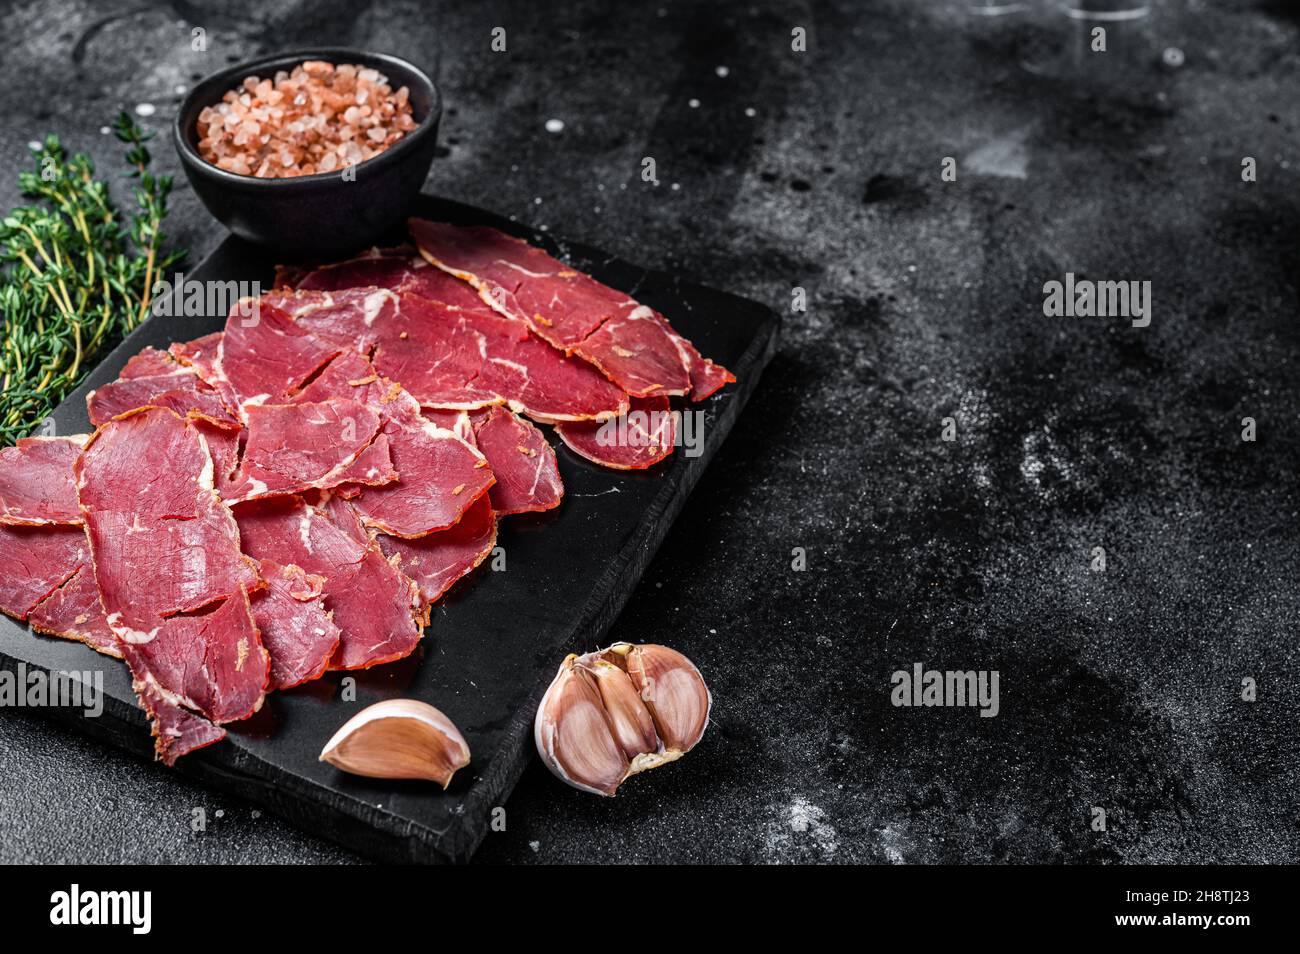 Sliced Pastrami roasted beef meat with herbs. Black background. Top view. Copy space Stock Photo